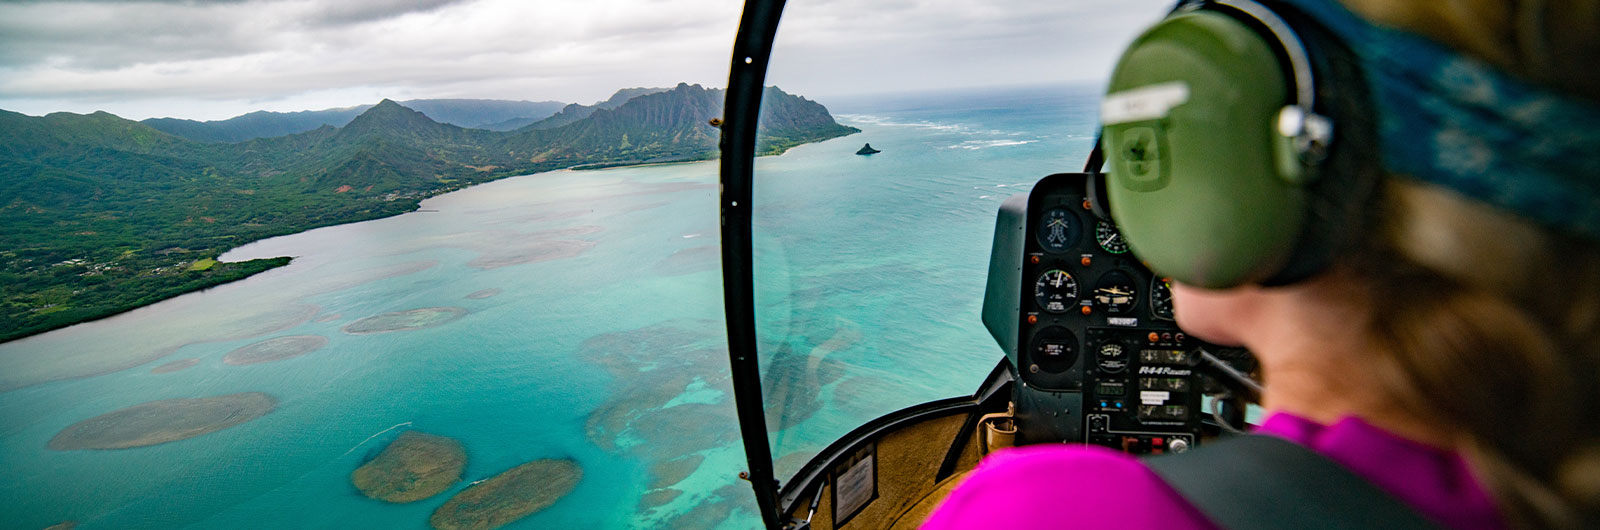 Top 5 Oahu Helicopter Tours